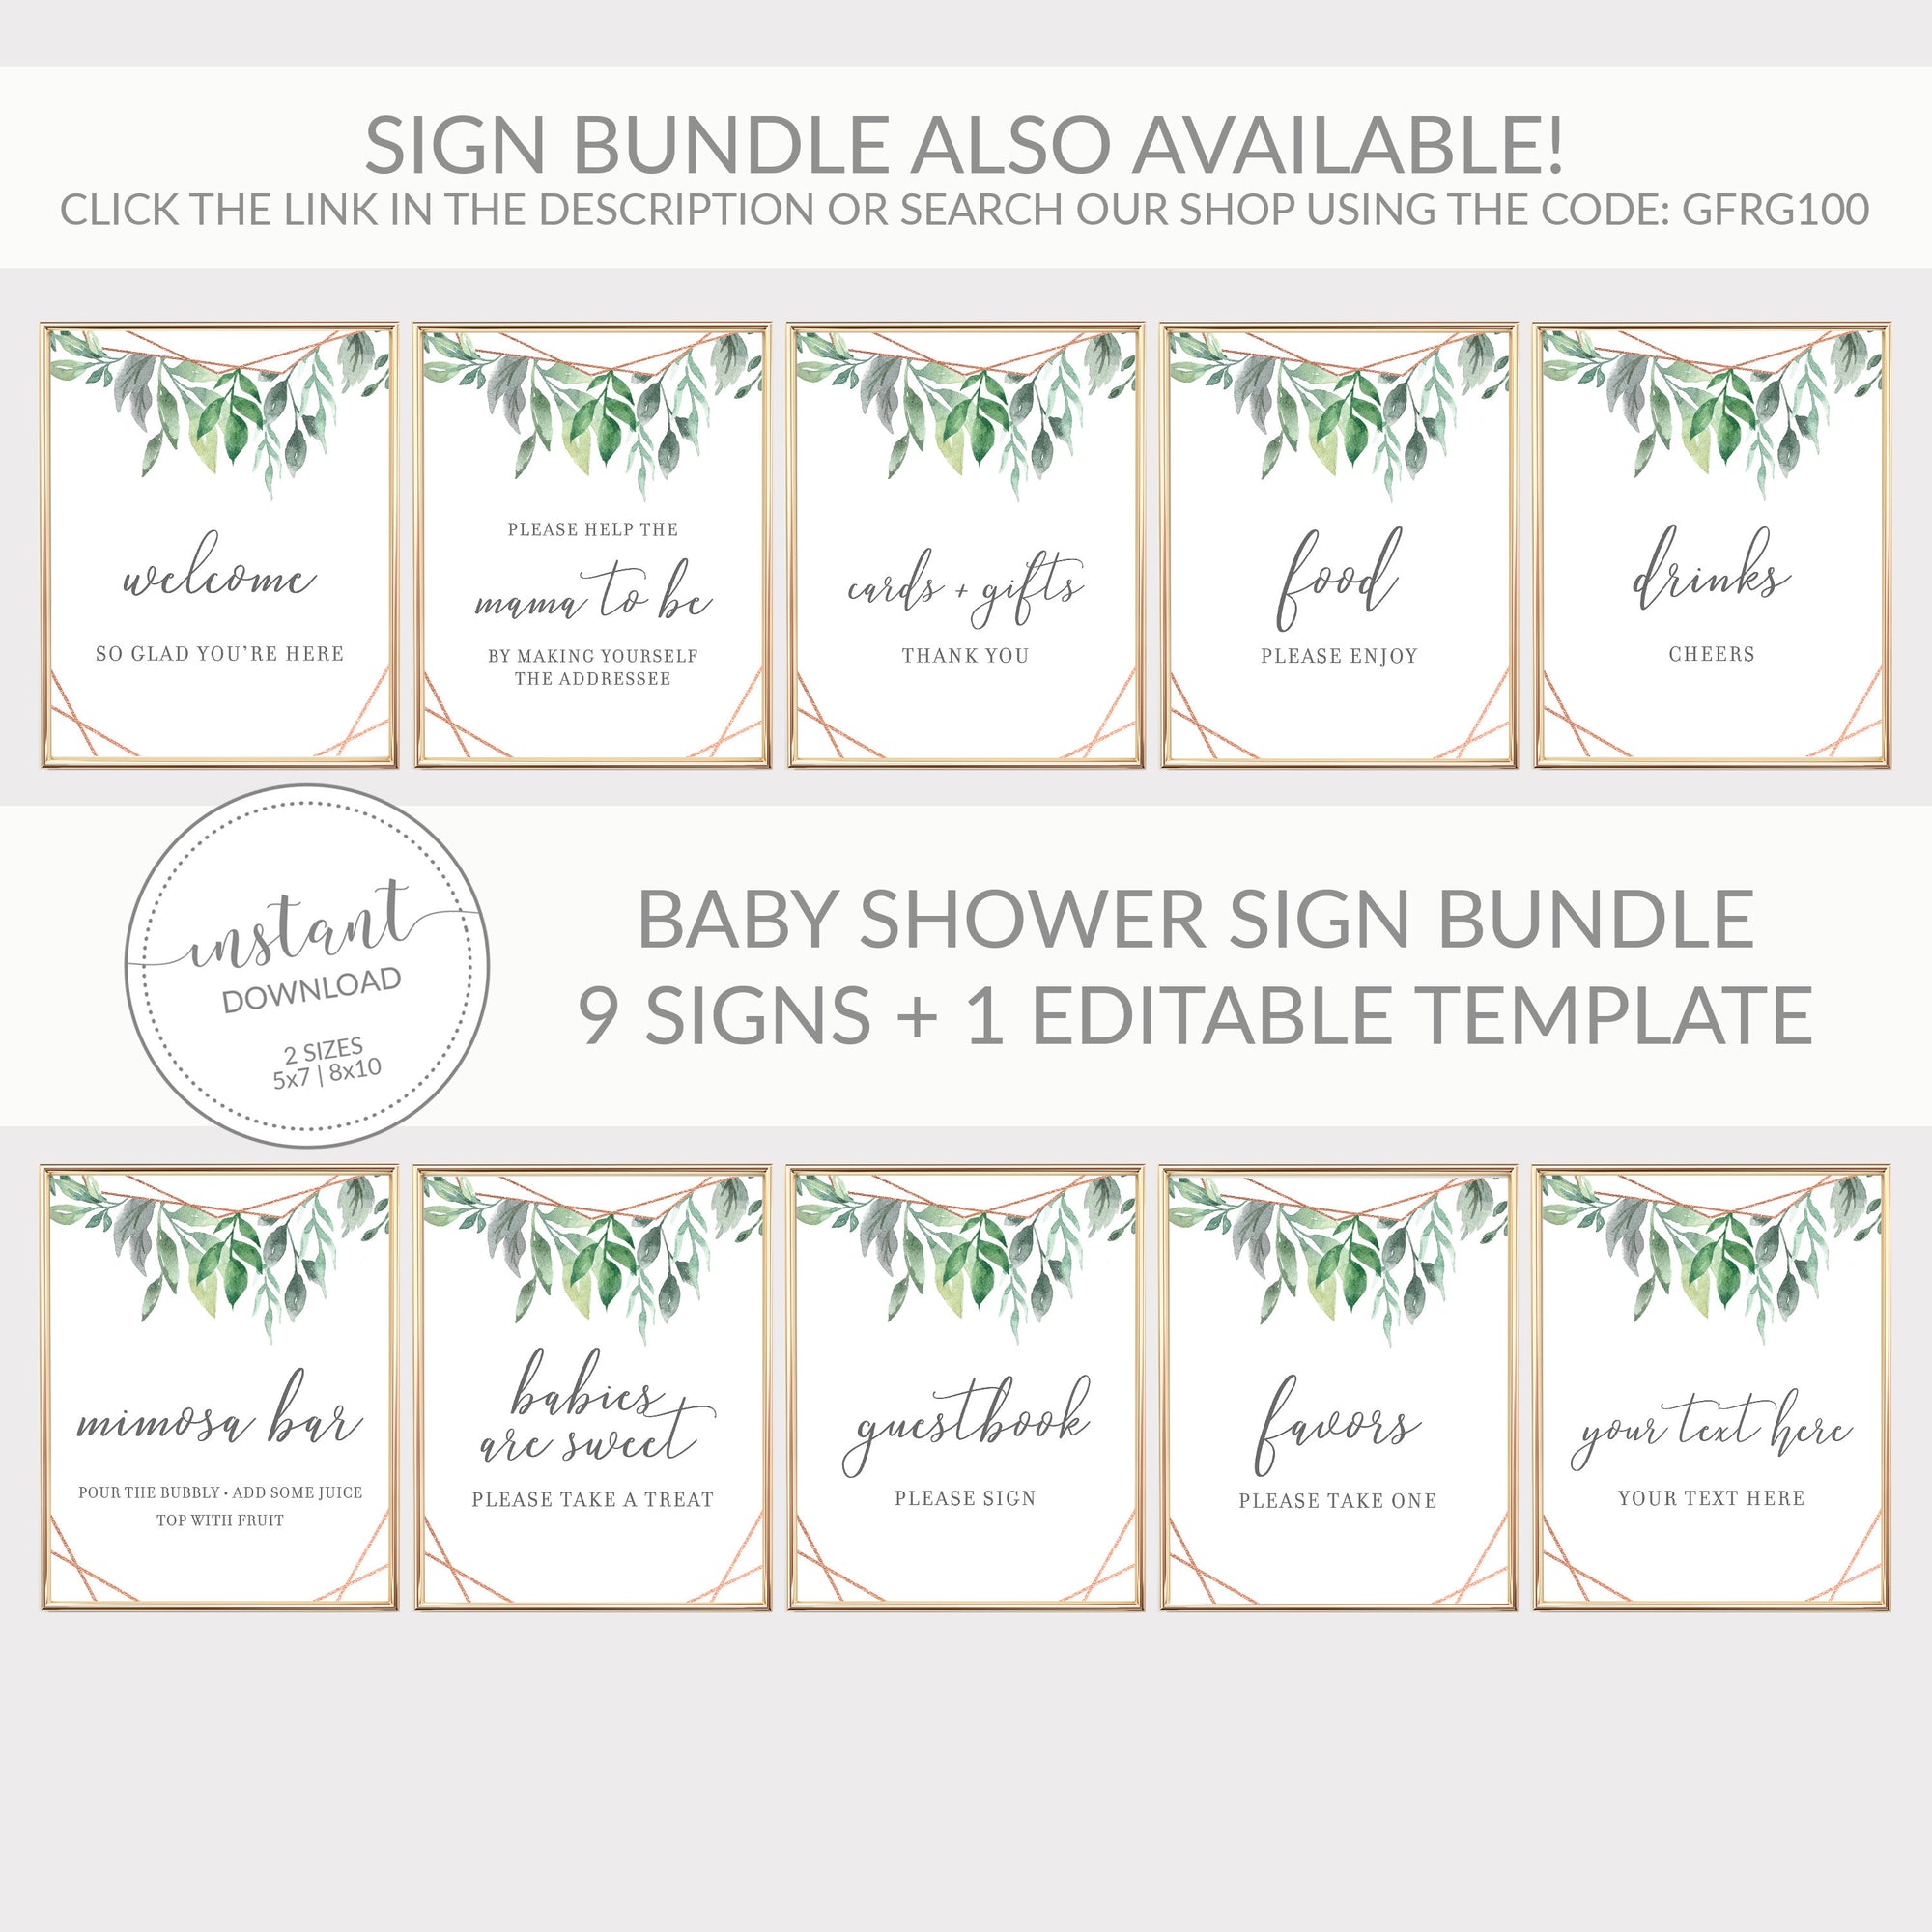 Geometric Rose Gold Greenery Cards and Gifts Printable Sign INSTANT DOWNLOAD, Bridal Shower, Baby Shower, Wedding Decorations - GFRG100 - @PlumPolkaDot 